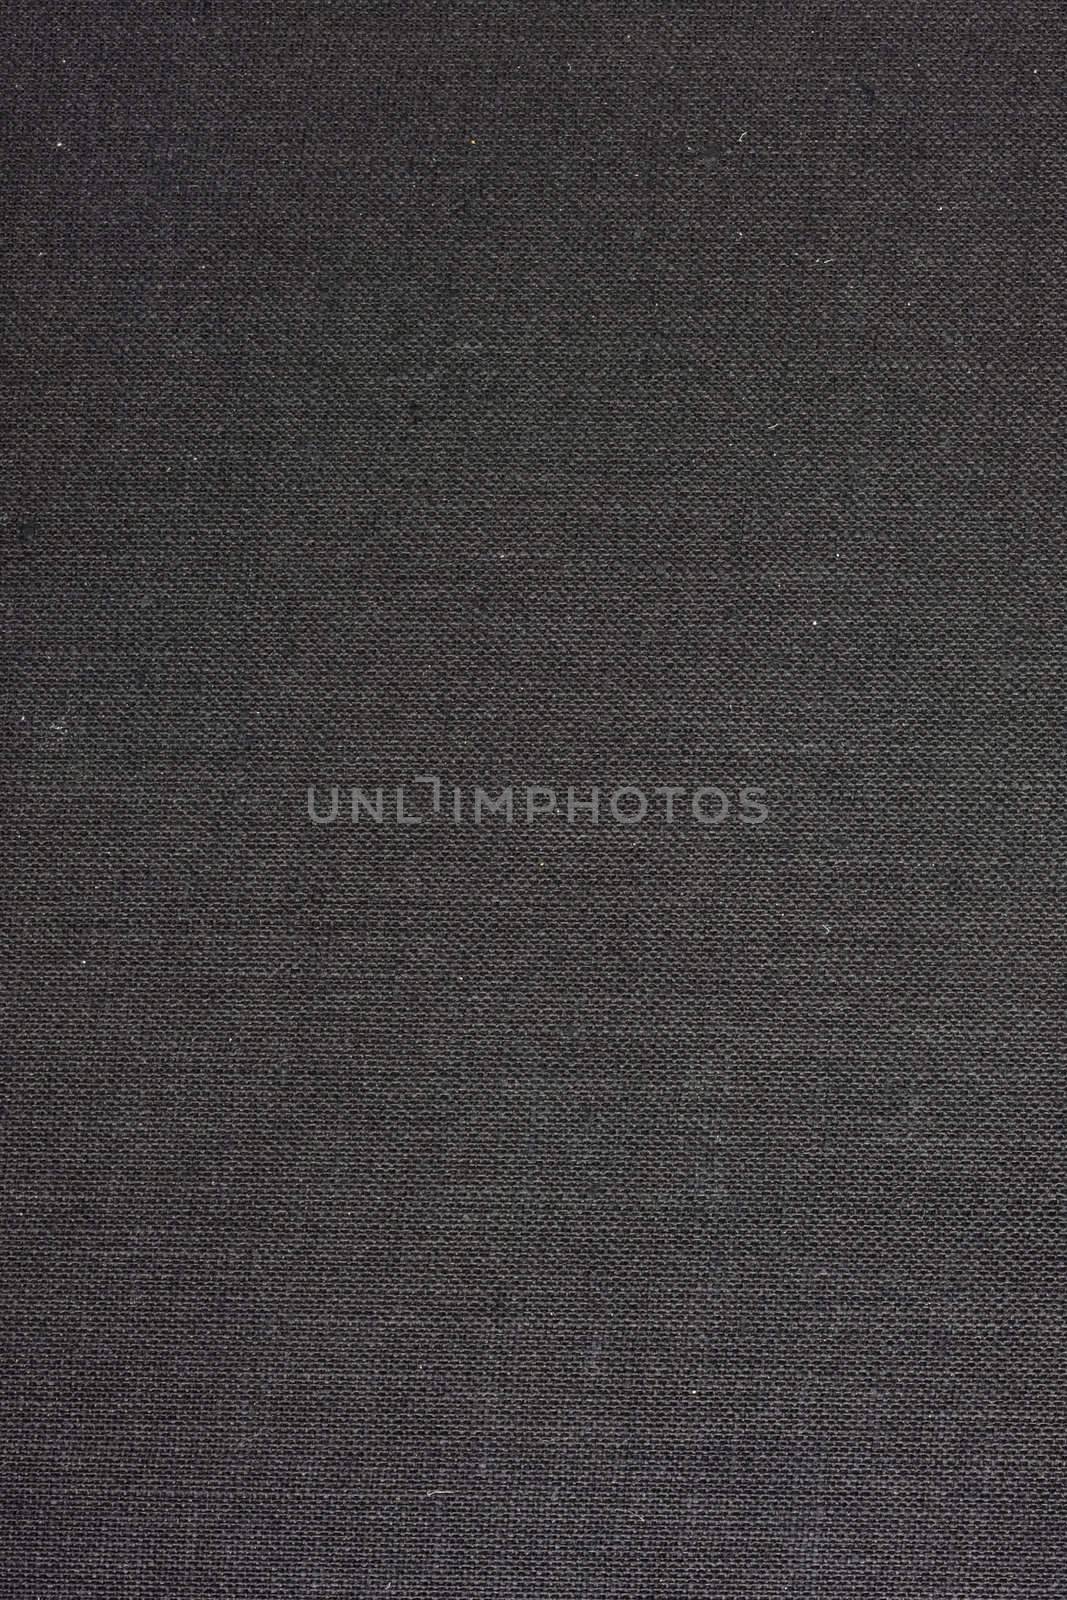 black textile background from 1960s book cover